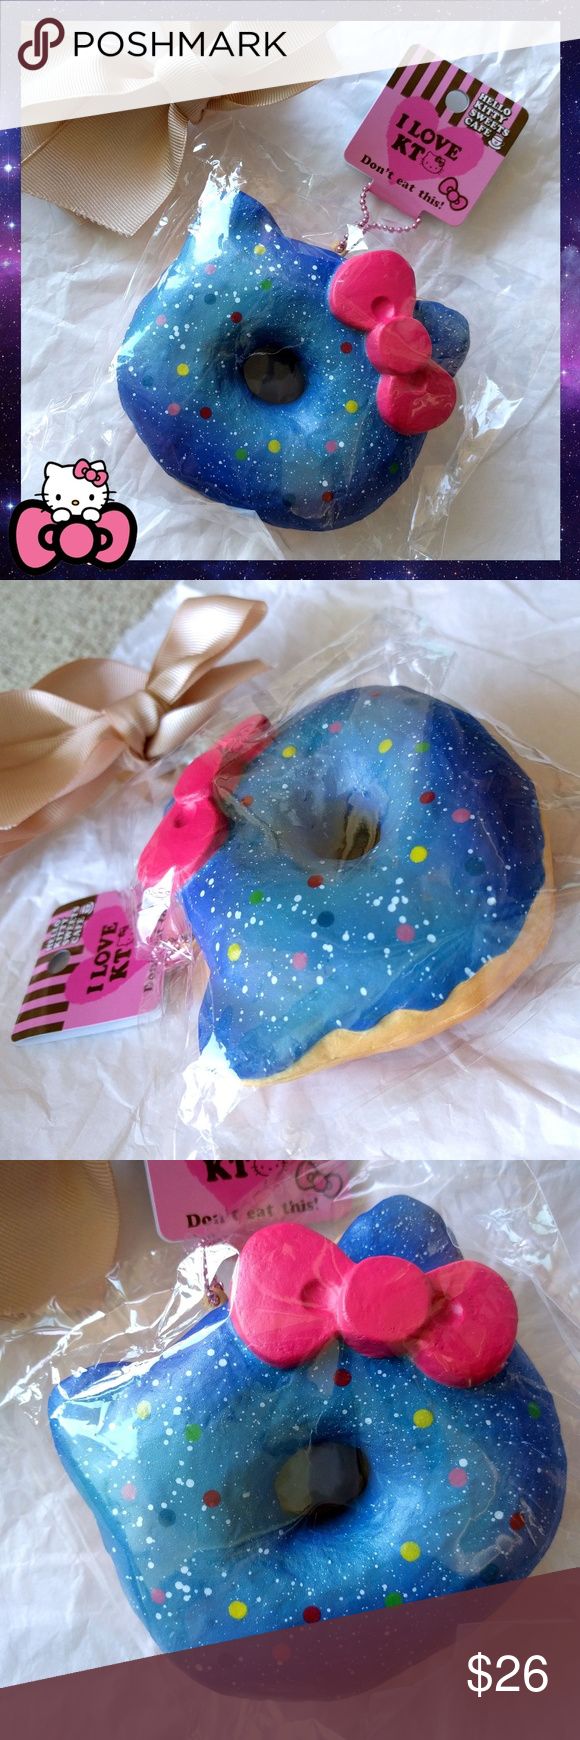 Licensed JUMBO HELLO KITTY GALAXY DONUT SQUISHY Soft and squishy Authen